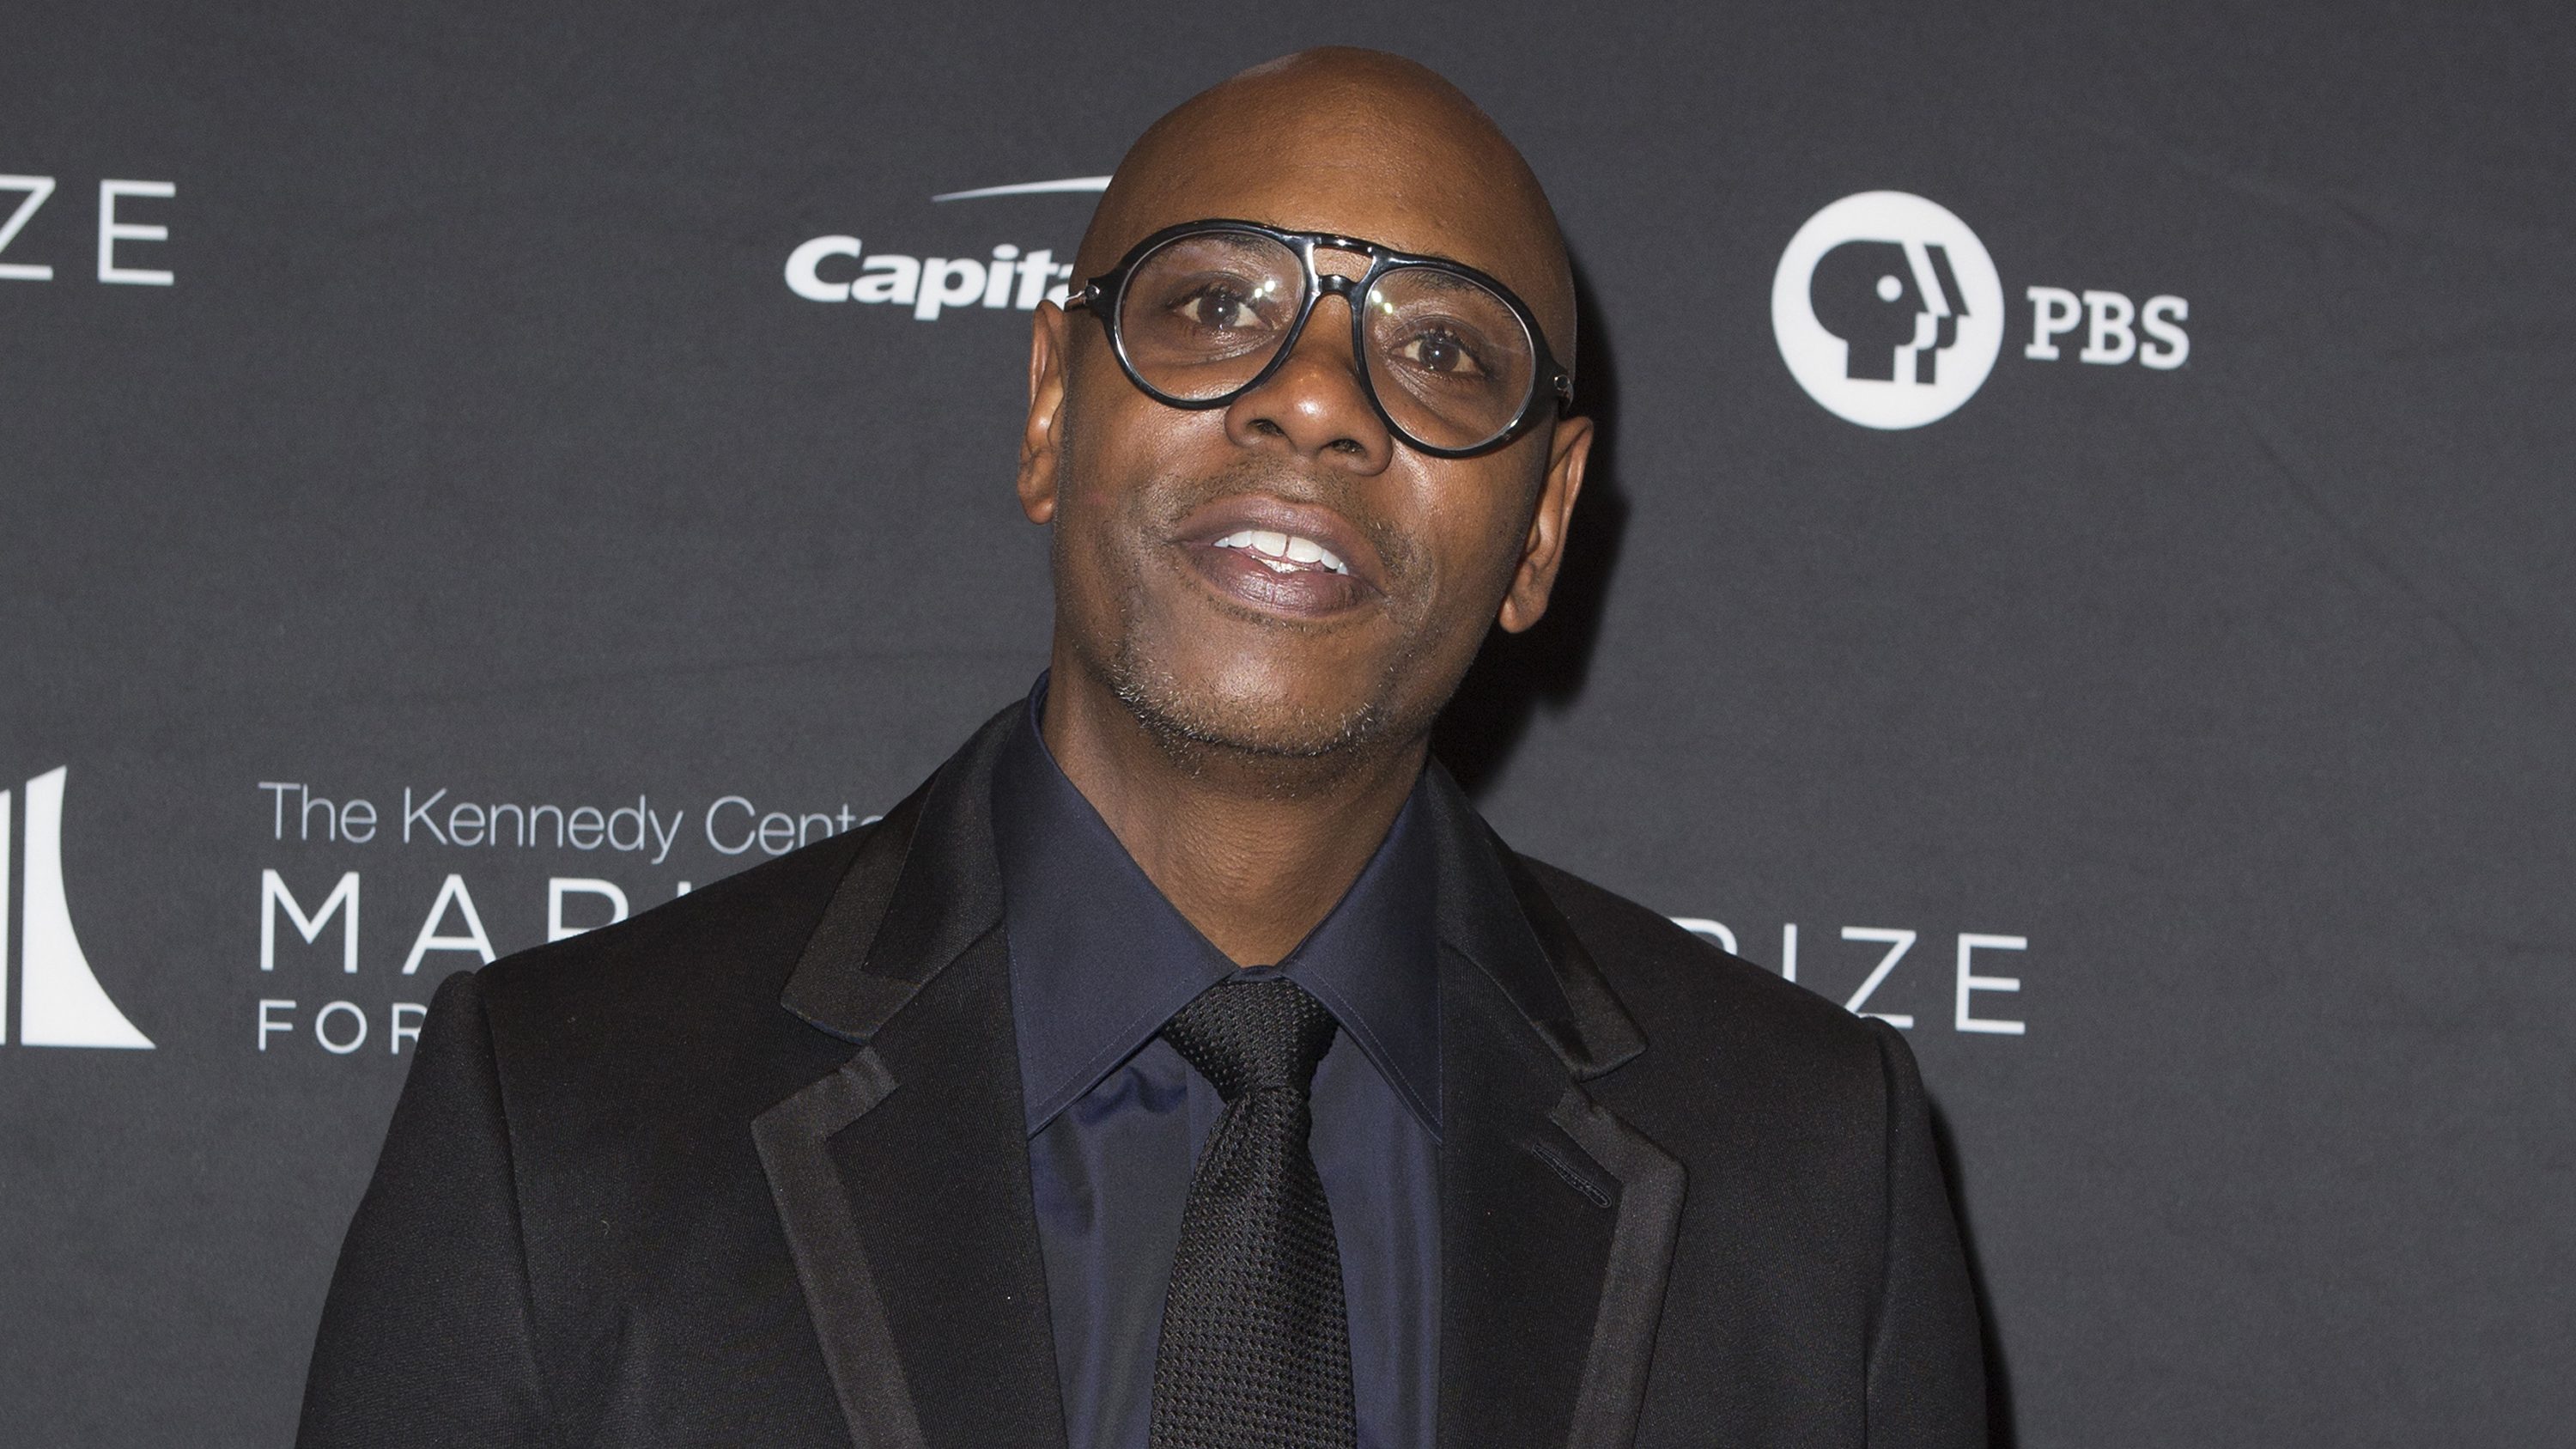 Dave Chappelle Says He'd Meet With Transgender Netflix Workers – Under Certain Conditions